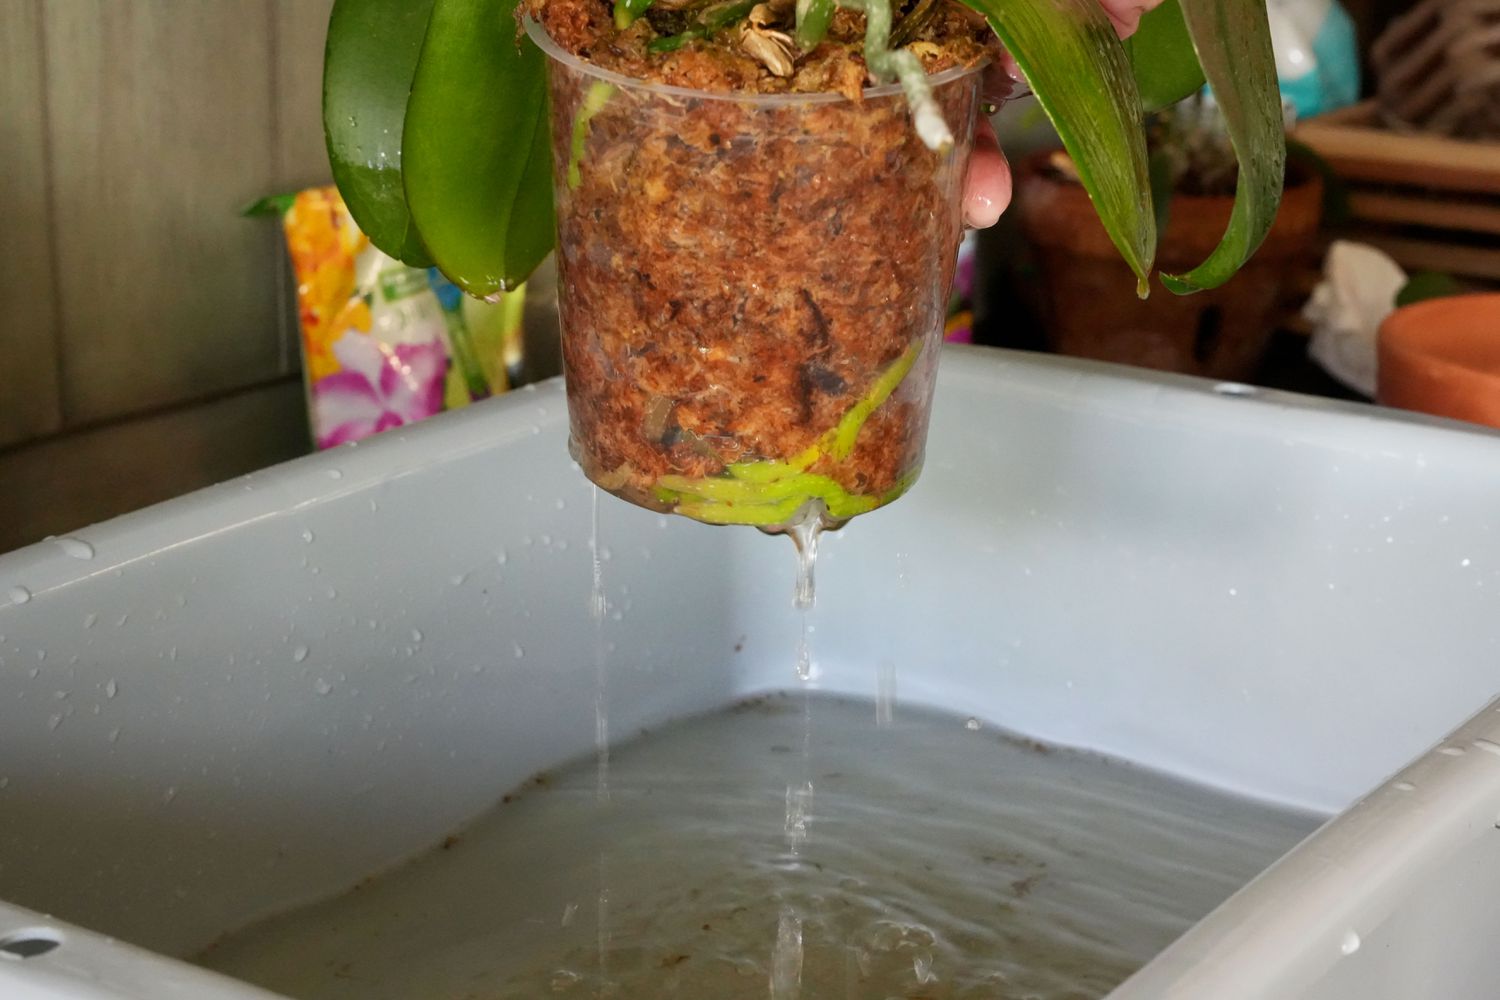 Orchid in plastic pot lifted from bucket of water